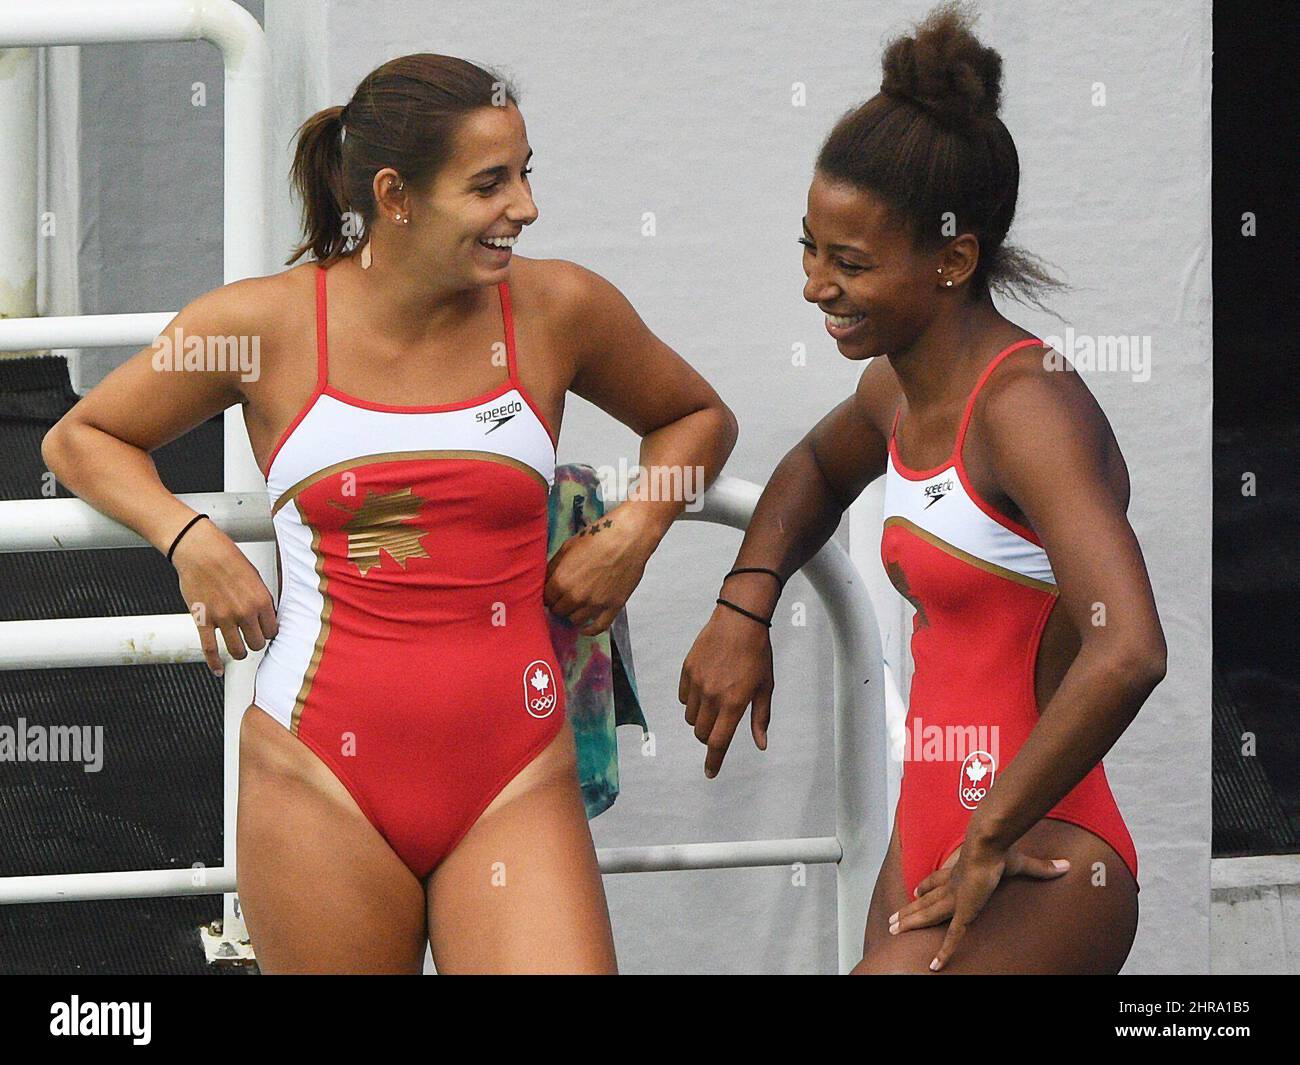 https://c8.alamy.com/comp/2HRA1B5/pamela-ware-left-and-jennifer-abel-of-canada-share-a-laugh-before-they-compete-in-the-womens-synchronized-three-metre-springboard-diving-final-at-the-2016-olympic-games-in-rio-de-janeiro-brazil-on-sunday-aug-7-2016-the-canadian-presssean-kilpatrick-2HRA1B5.jpg